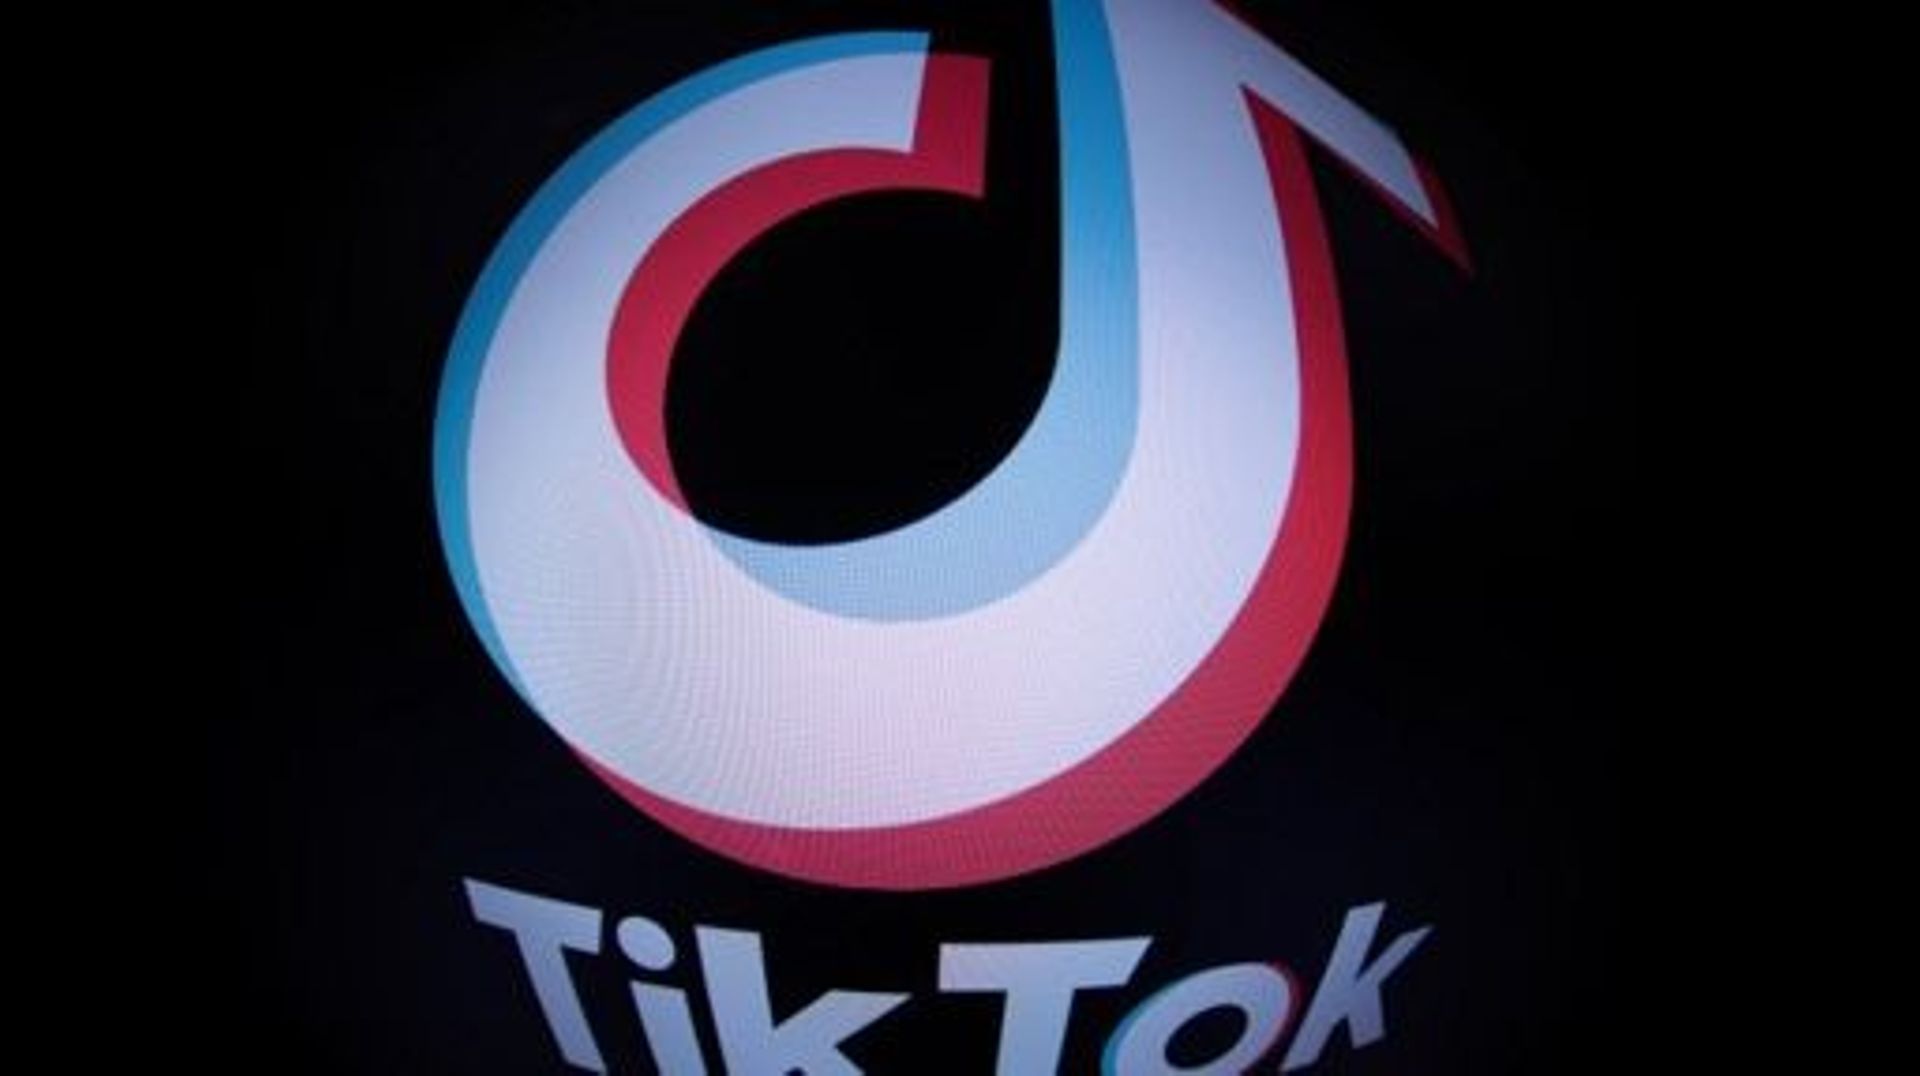 This photograph taken with a fish-eye lens in Paris on March 1, 2023 shows the social media application logo TikTok. The European Parliament has told staff on March 1, 2023 to purge TikTok from devices used for work because of data protection concerns, af